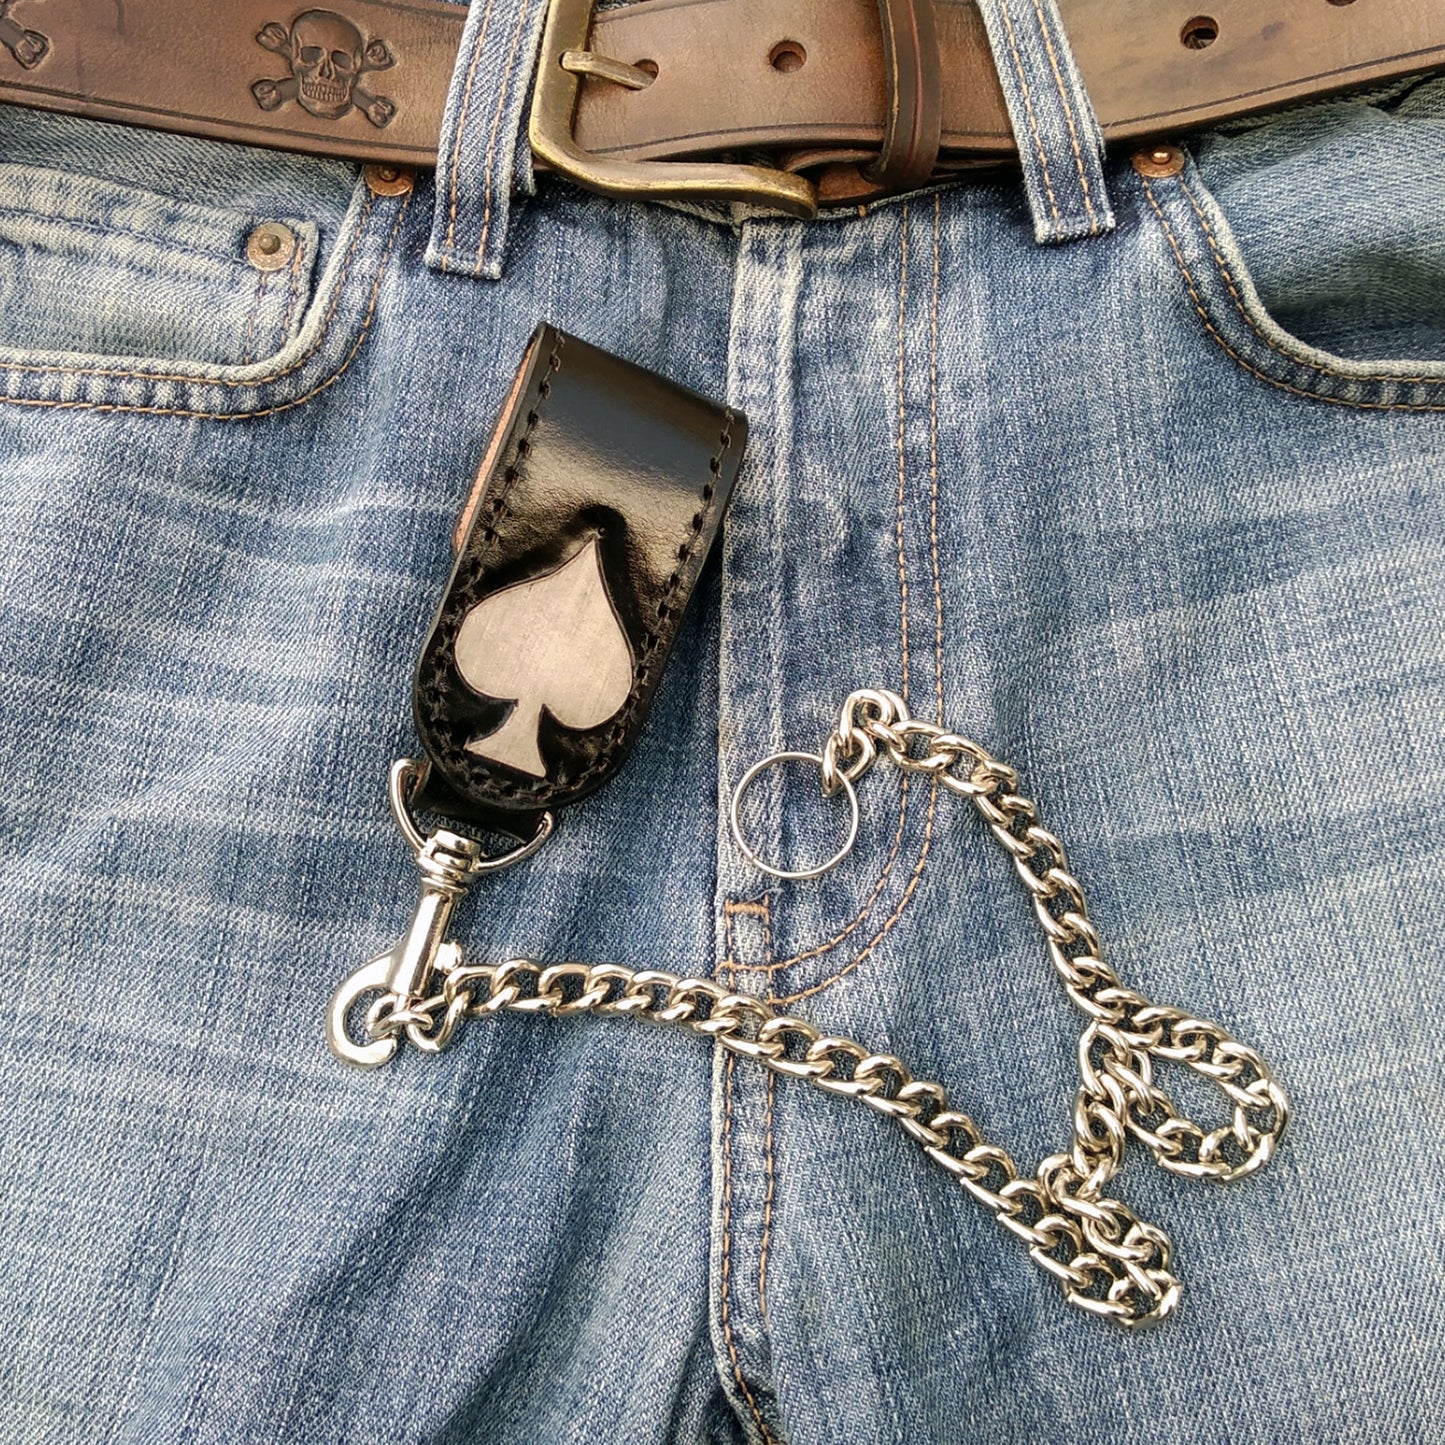 Handmade leather Ace of Spades Wallet Chain